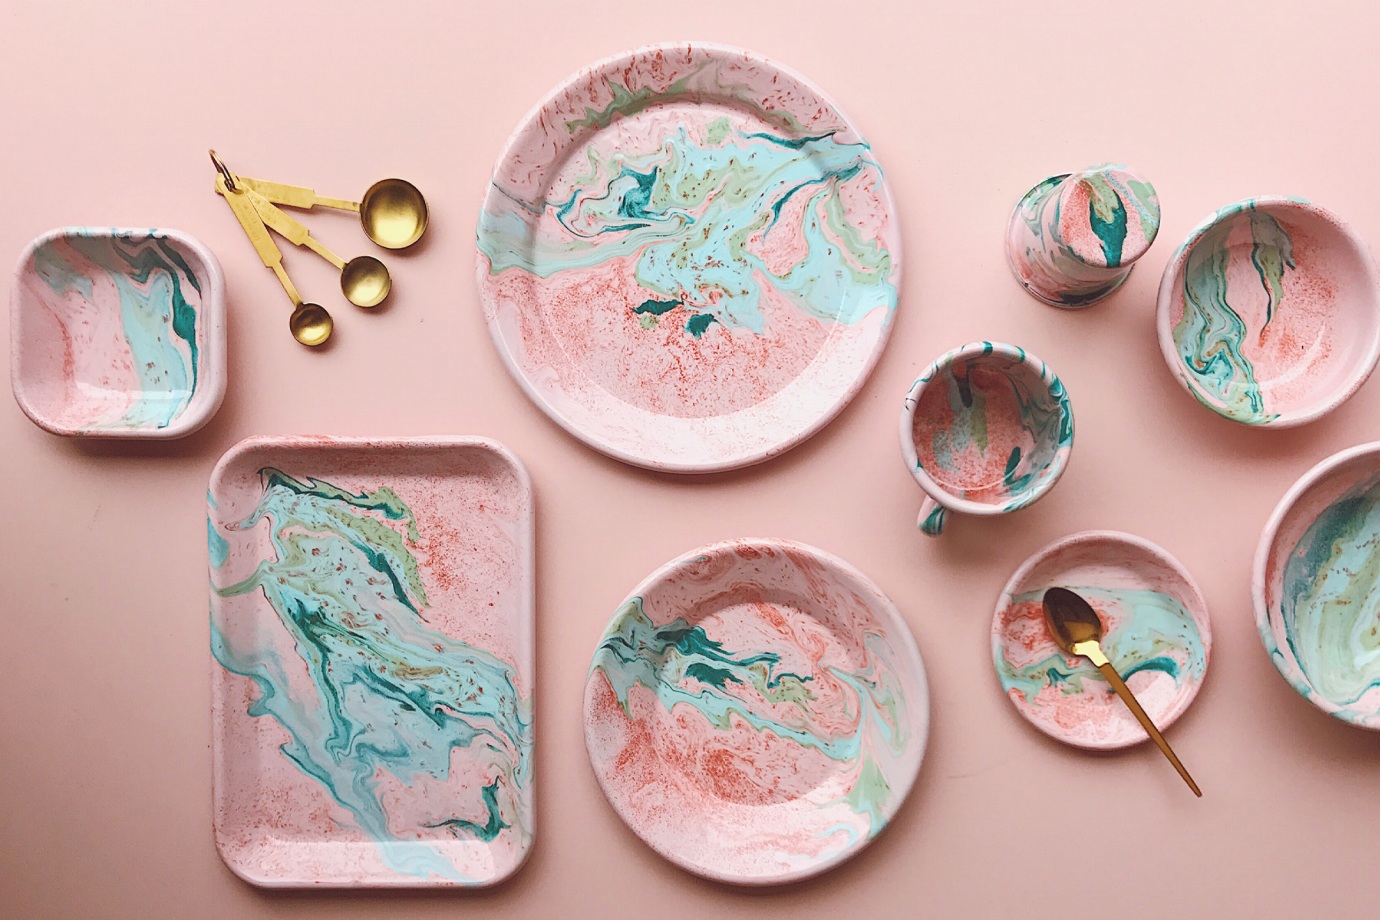   New Marble by Bornn Enamelware  - Official picture 